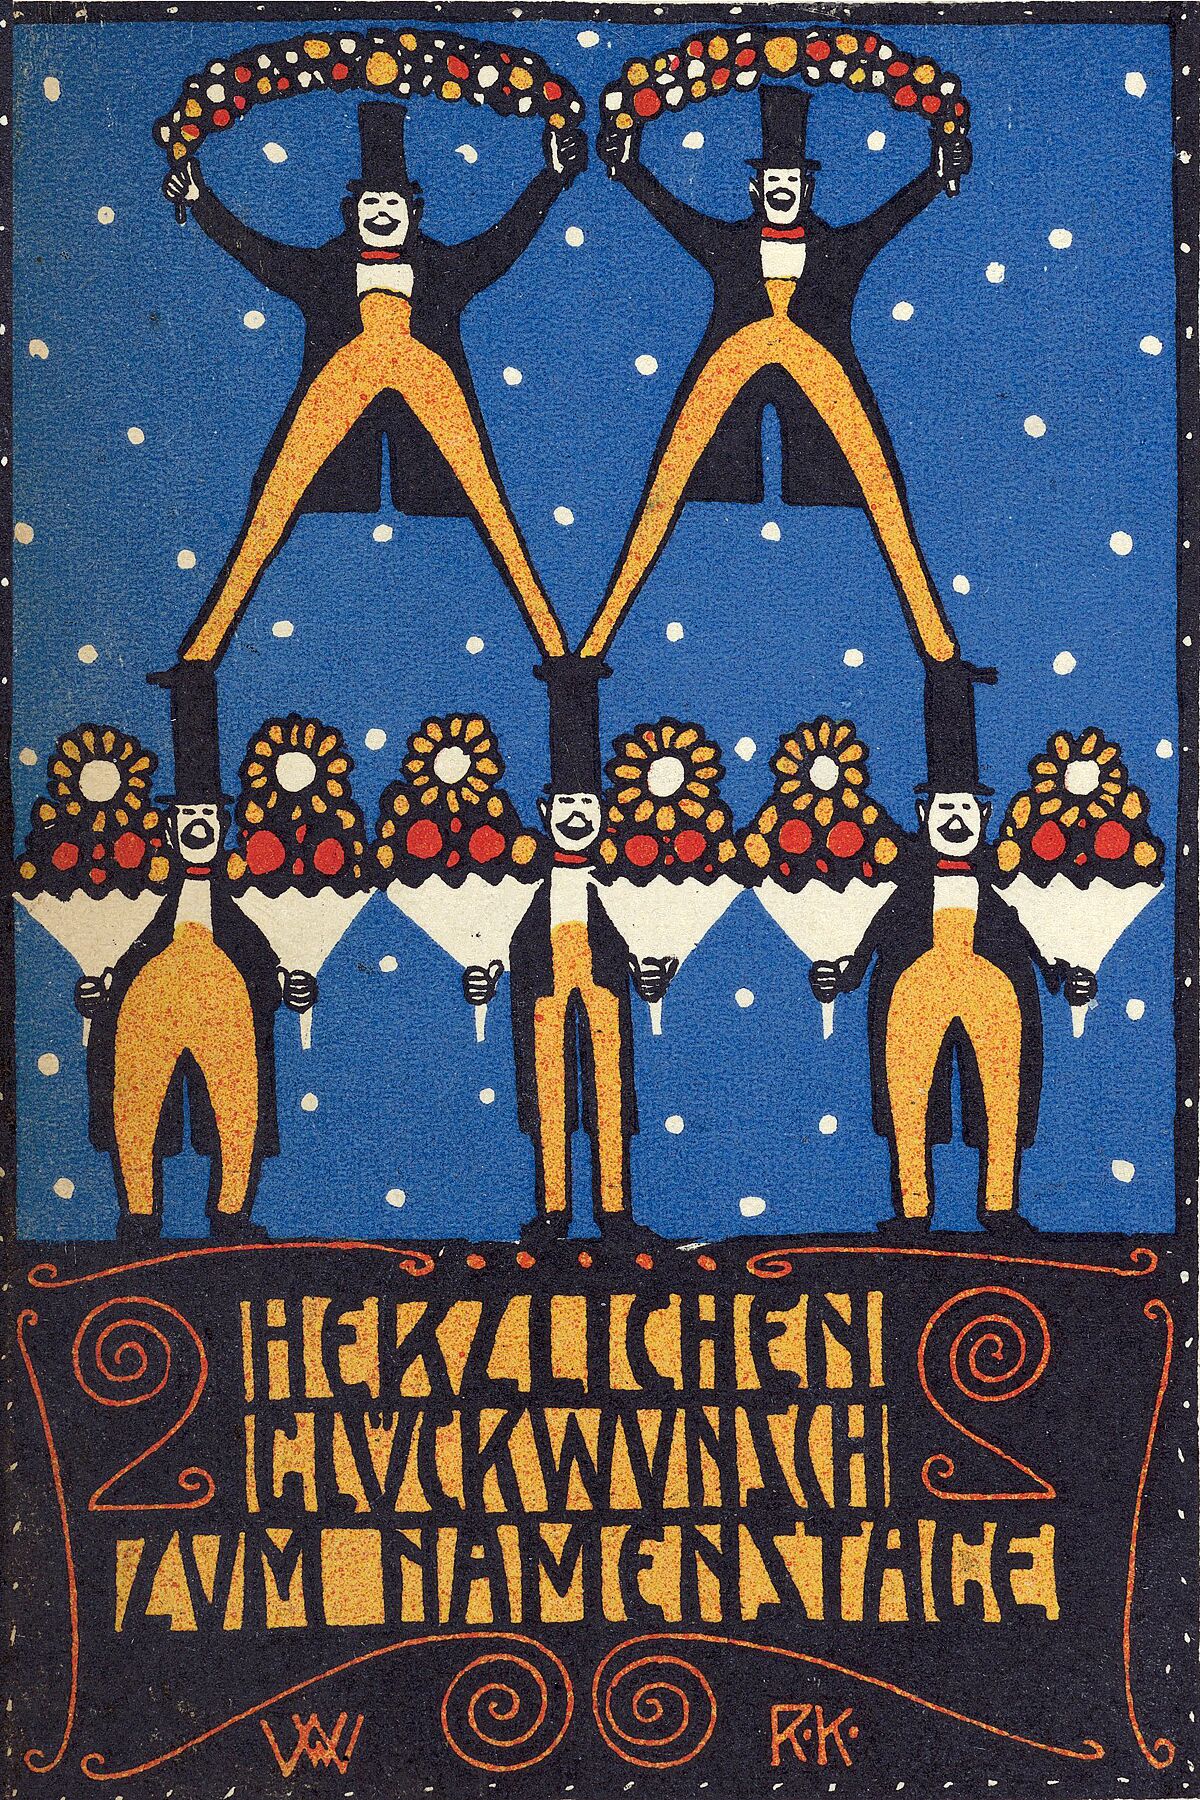 Congratulations on Your Name Day by Rudolf Kalvach, 1907